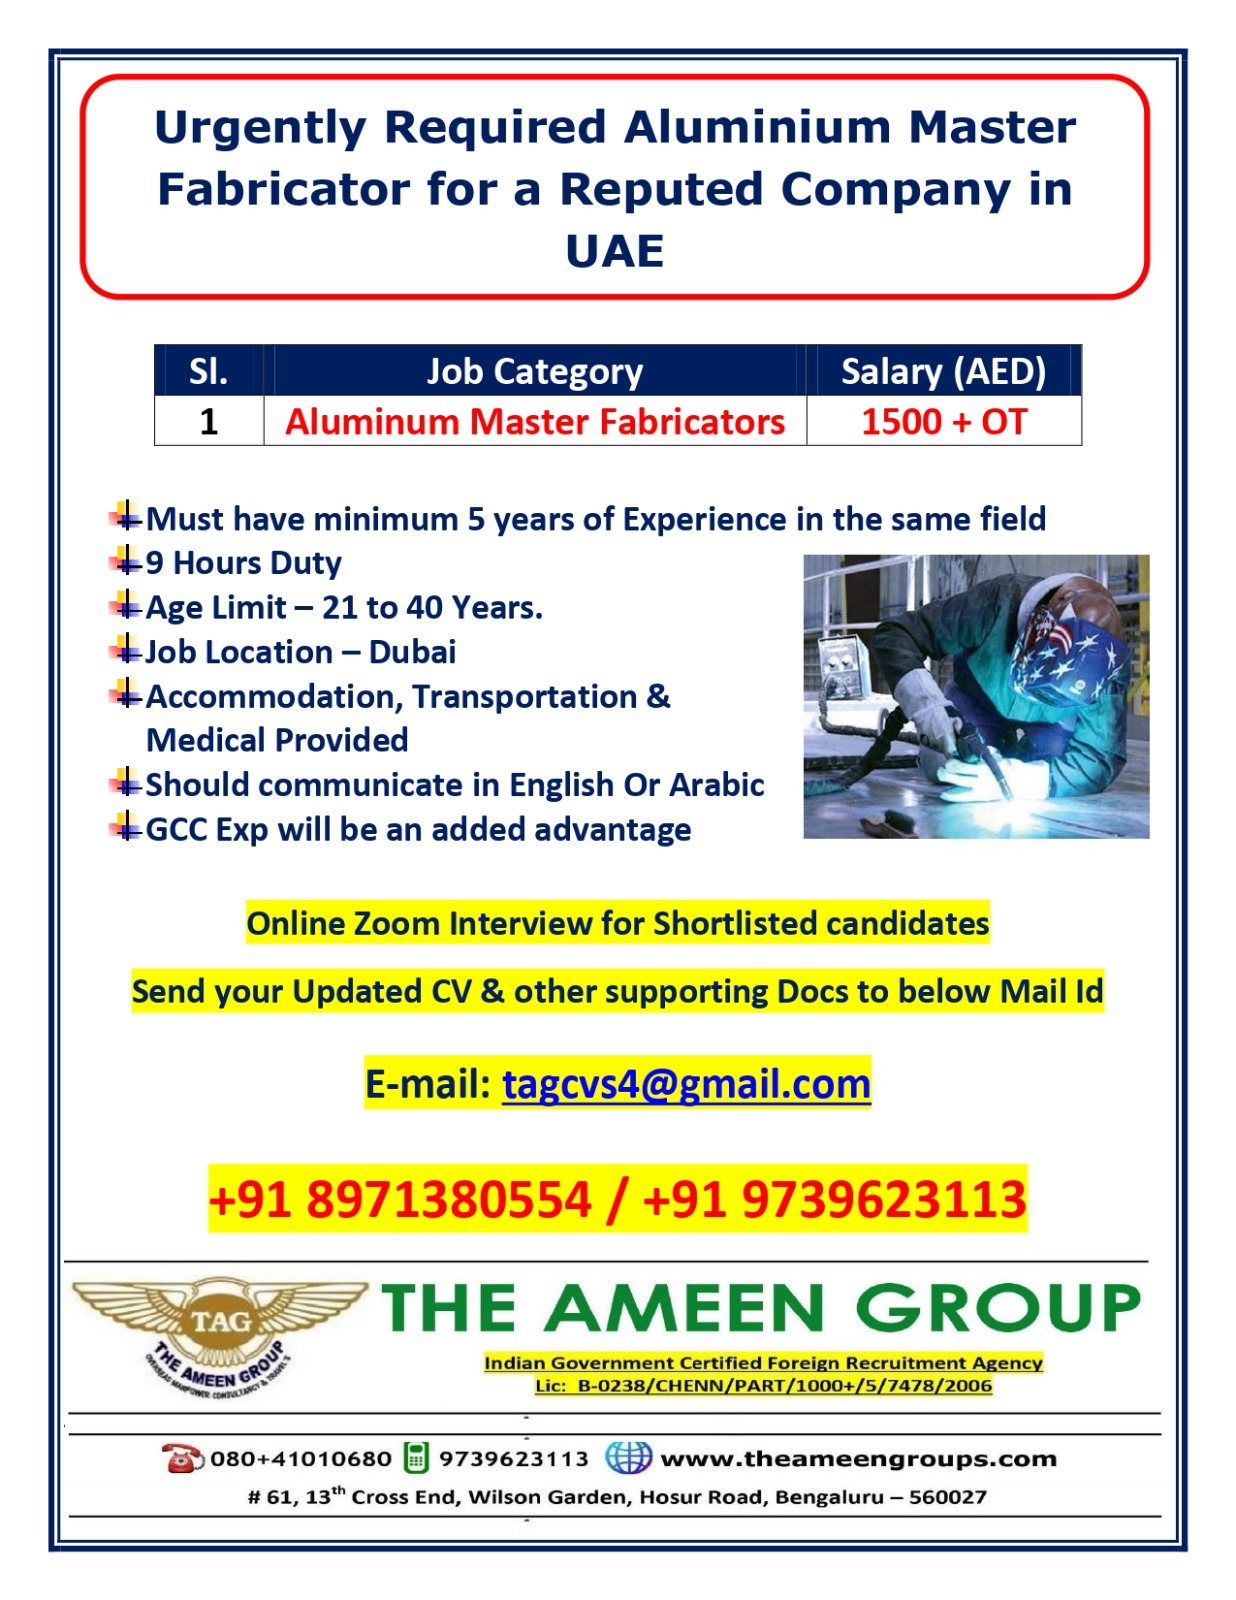 REQUIREMENT FOR UAE